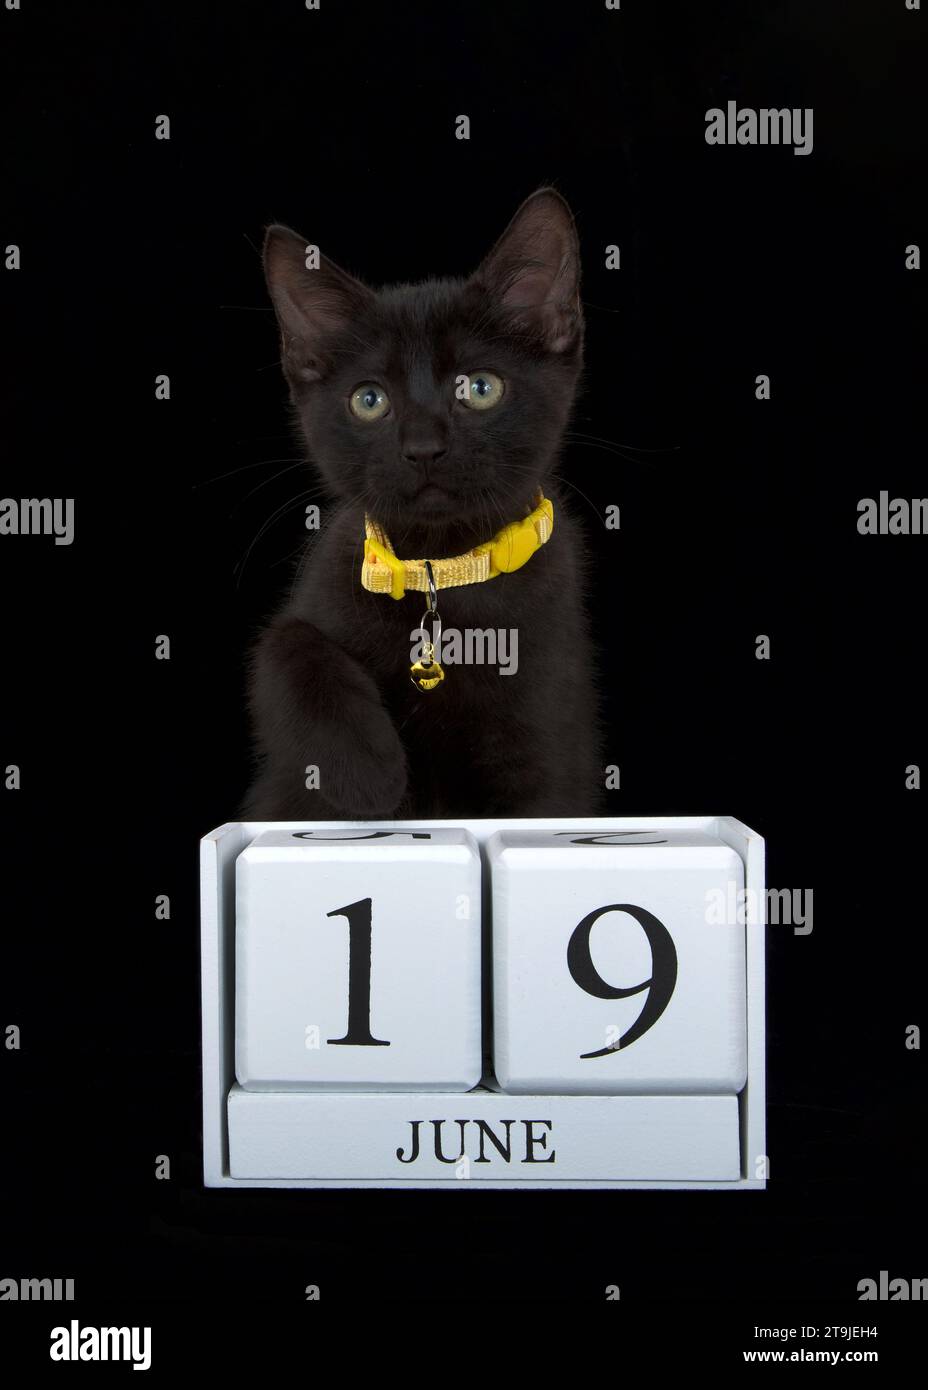 Adorable black kitten wearing a bright yellow collar peeking over white wooden blocks with June 19th date. Juneteenth. Now a national holiday. Stock Photo